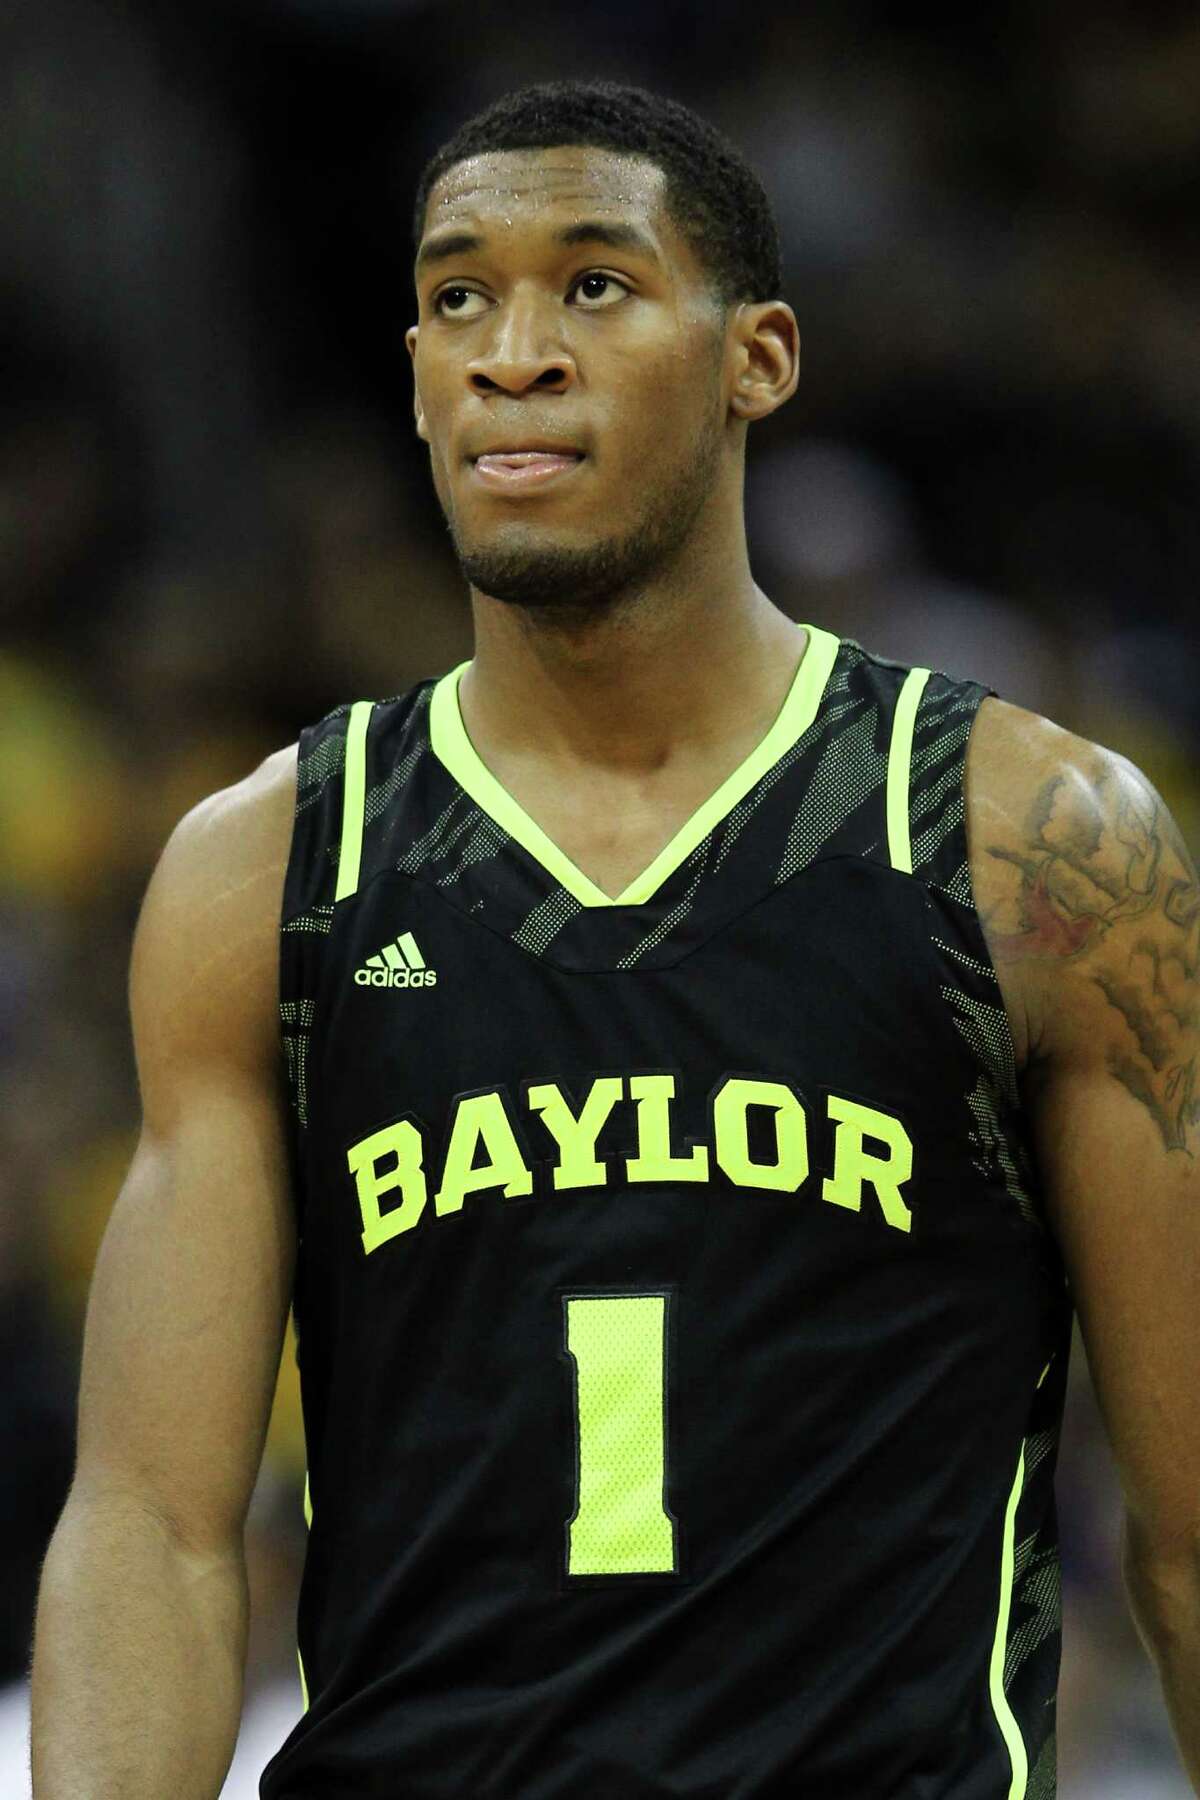 KANSAS CITY, MO - MARCH 10: Perry Jones III #1 of the Baylor Bears reacts in the second half against the Missouri Tigers during the championship game of the 2012 Big 12 Men's Basketball Tournament at Sprint Center on March 10, 2012 in Kansas City, Missouri. (Photo by Jamie Squire/Getty Images)